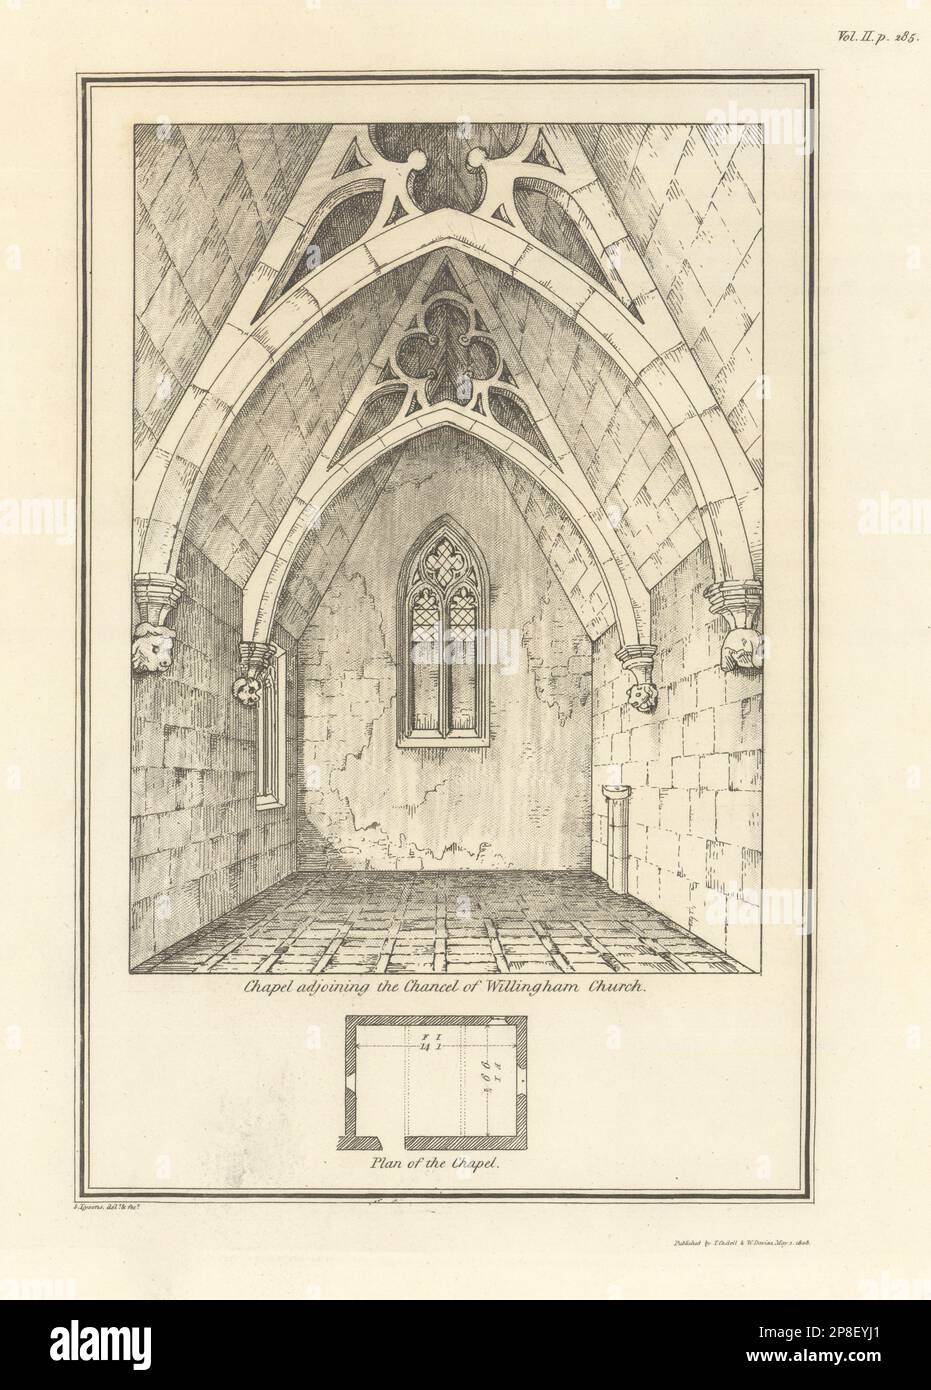 Chapel adjoining the Chancel of Willingham Church. LYSONS 1810 old print Stock Photo